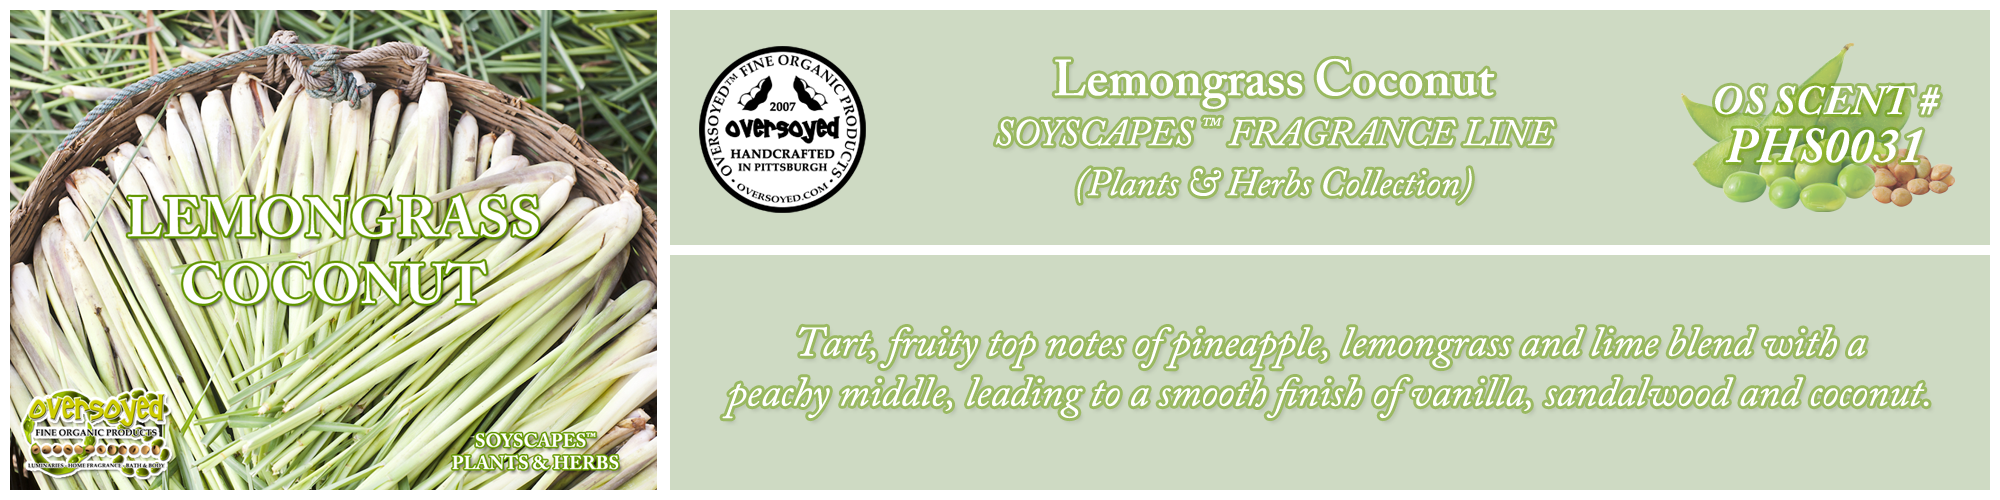 Lemongrass Coconut Handcrafted Products Collection